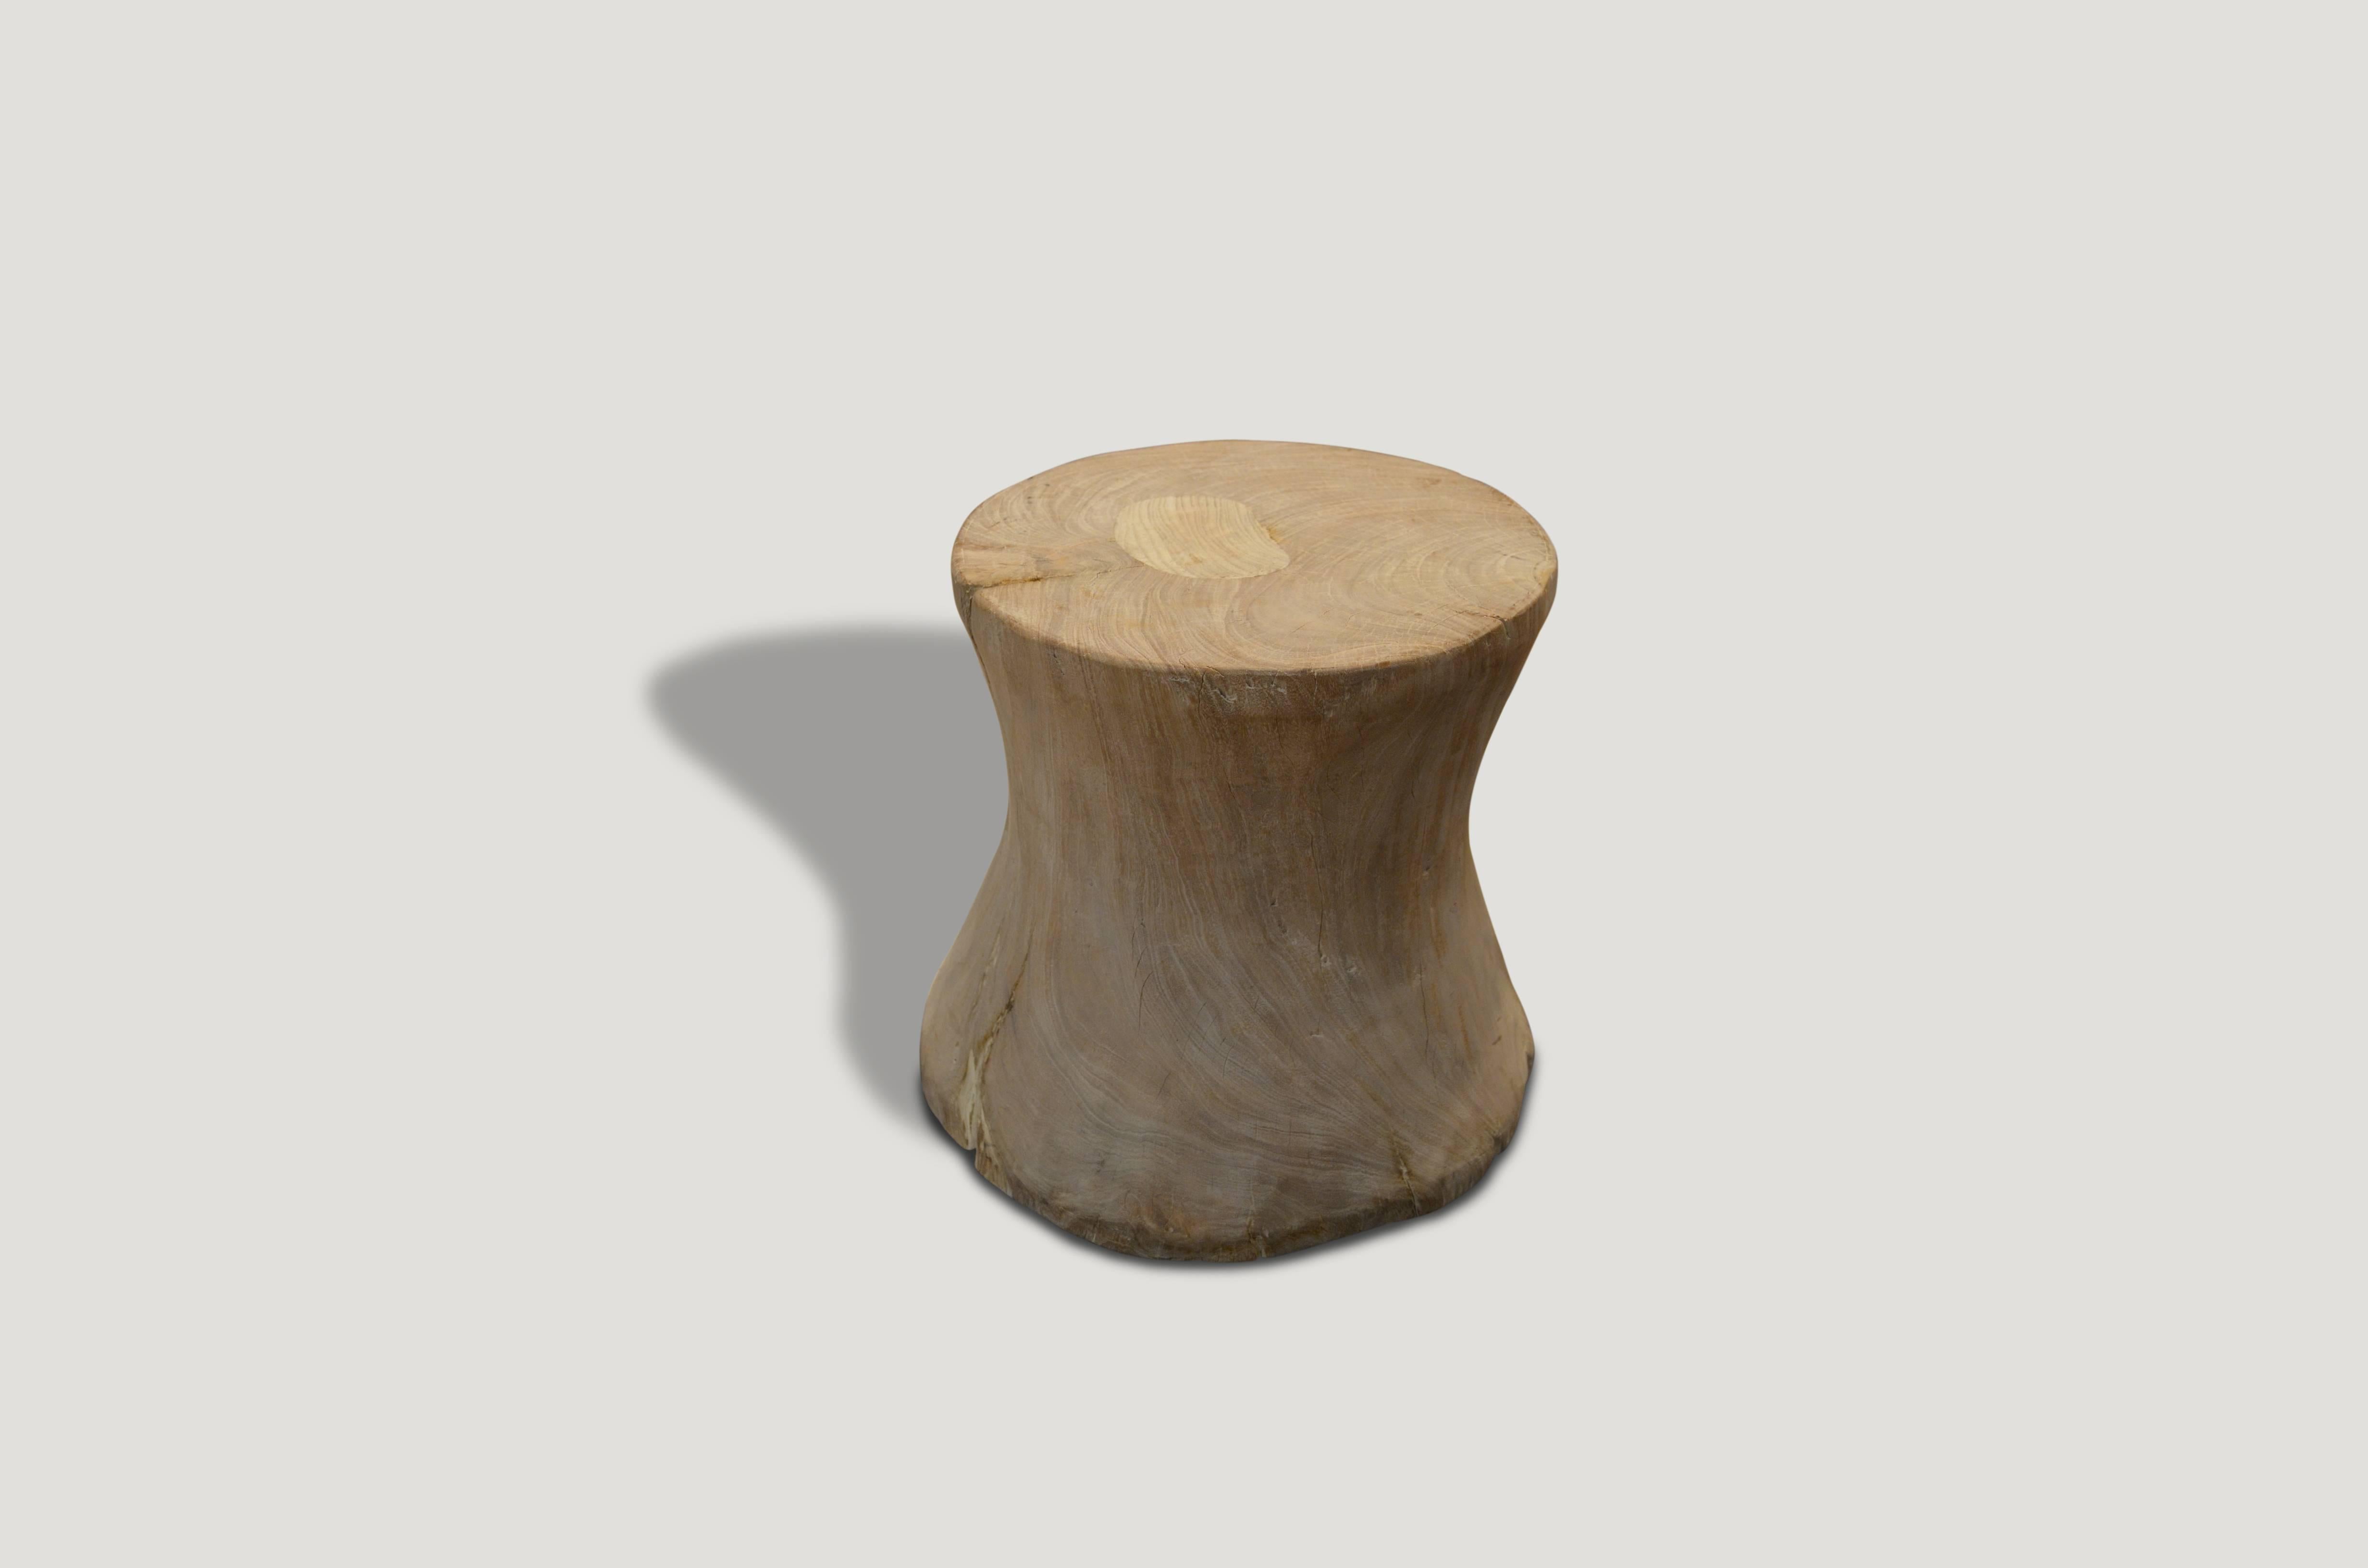 Weathered teak wood side table or stool.

The St. Barts collection features an exciting new line of organic white wash and natural weathered teak furniture. The reclaimed teak is left to bake in the sun and sea salt air for over a year to achieve